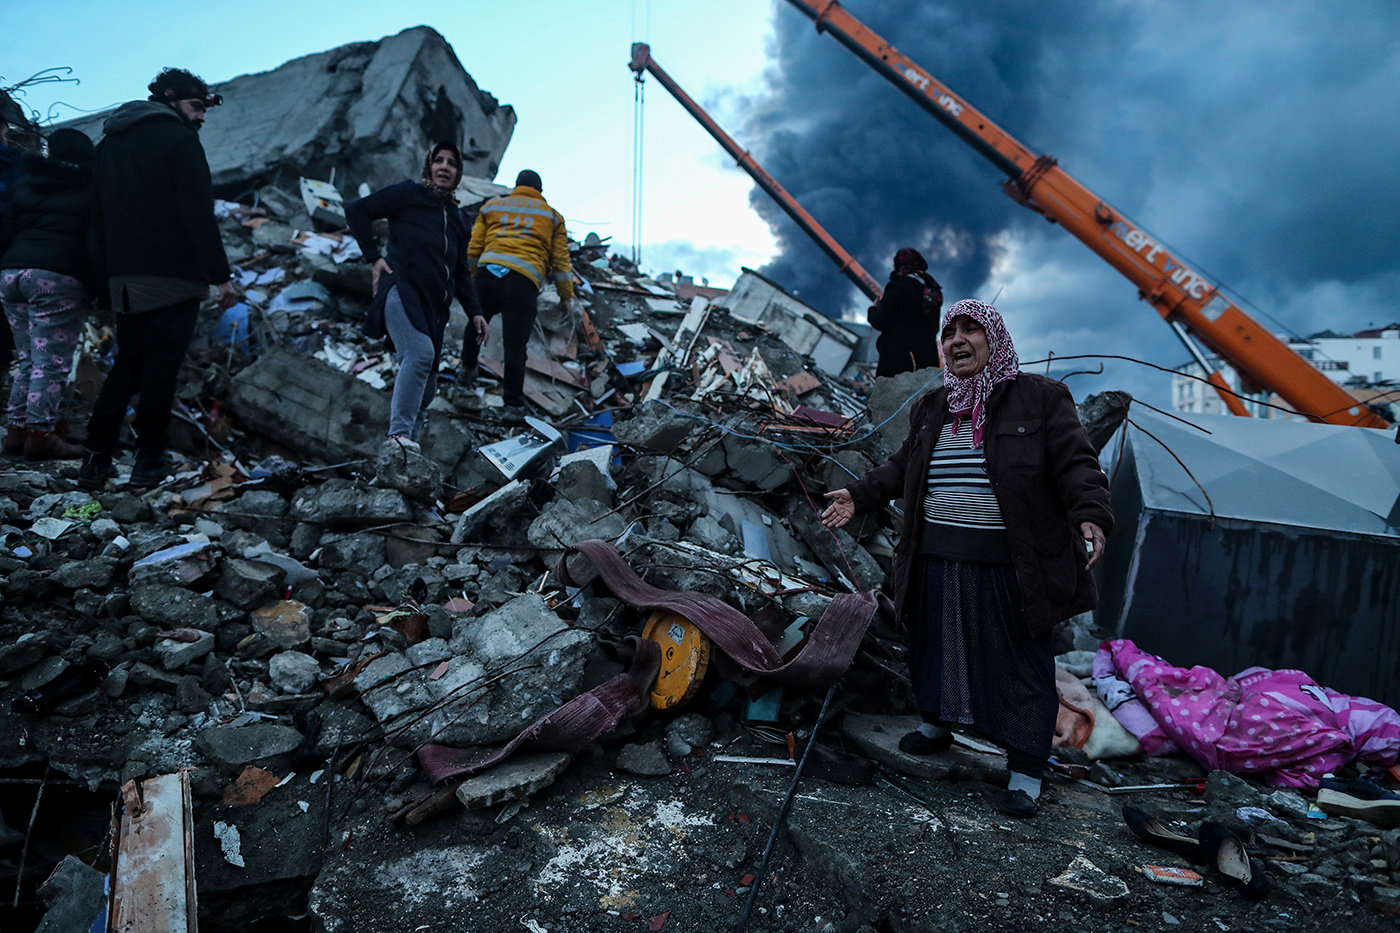 People search for victims at the site of a collapsed building after an earthquake in Iskenderun district of Hatay, Turkey, 07 February 2023. According to the US Geological Service, an earthquake with a preliminary magnitude of 7.8 struck southern Turkey close to the Syrian border. The earthquake caused buildings to collapse and sent shockwaves over northwest Syria, Cyprus, and Lebanon. Thousands of people have died and more than seven thousand have been injured in Turkey, according to AFAD, Turkish Disaster and Emergency Management Presidency.